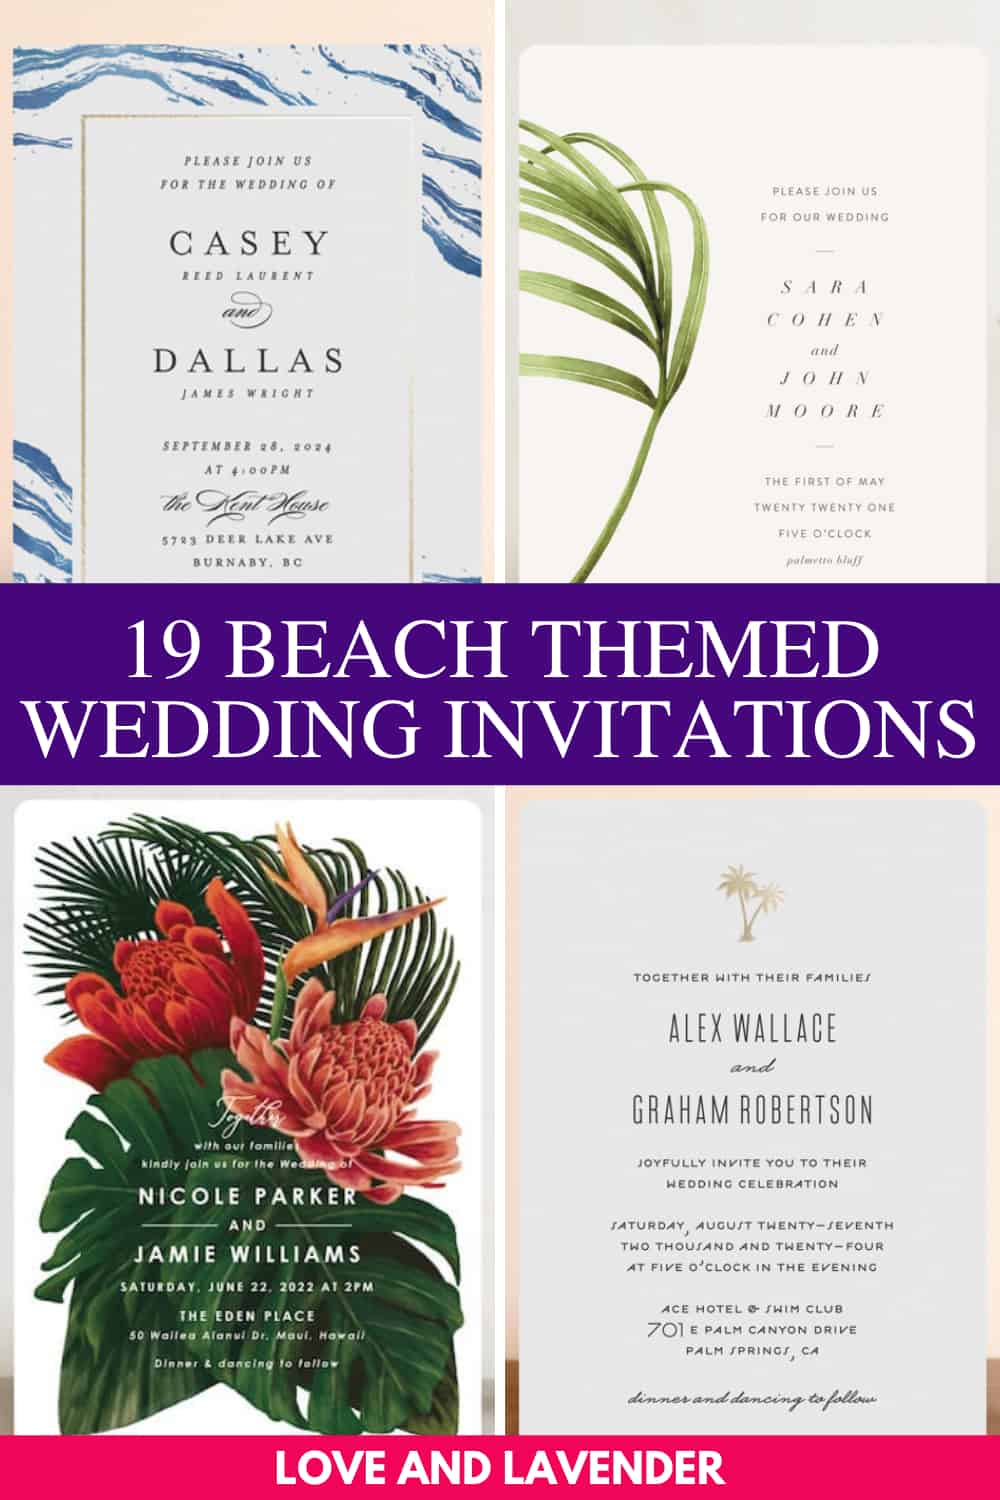 Make a Splash with One of These 19 Beach Themed Wedding Invitations!